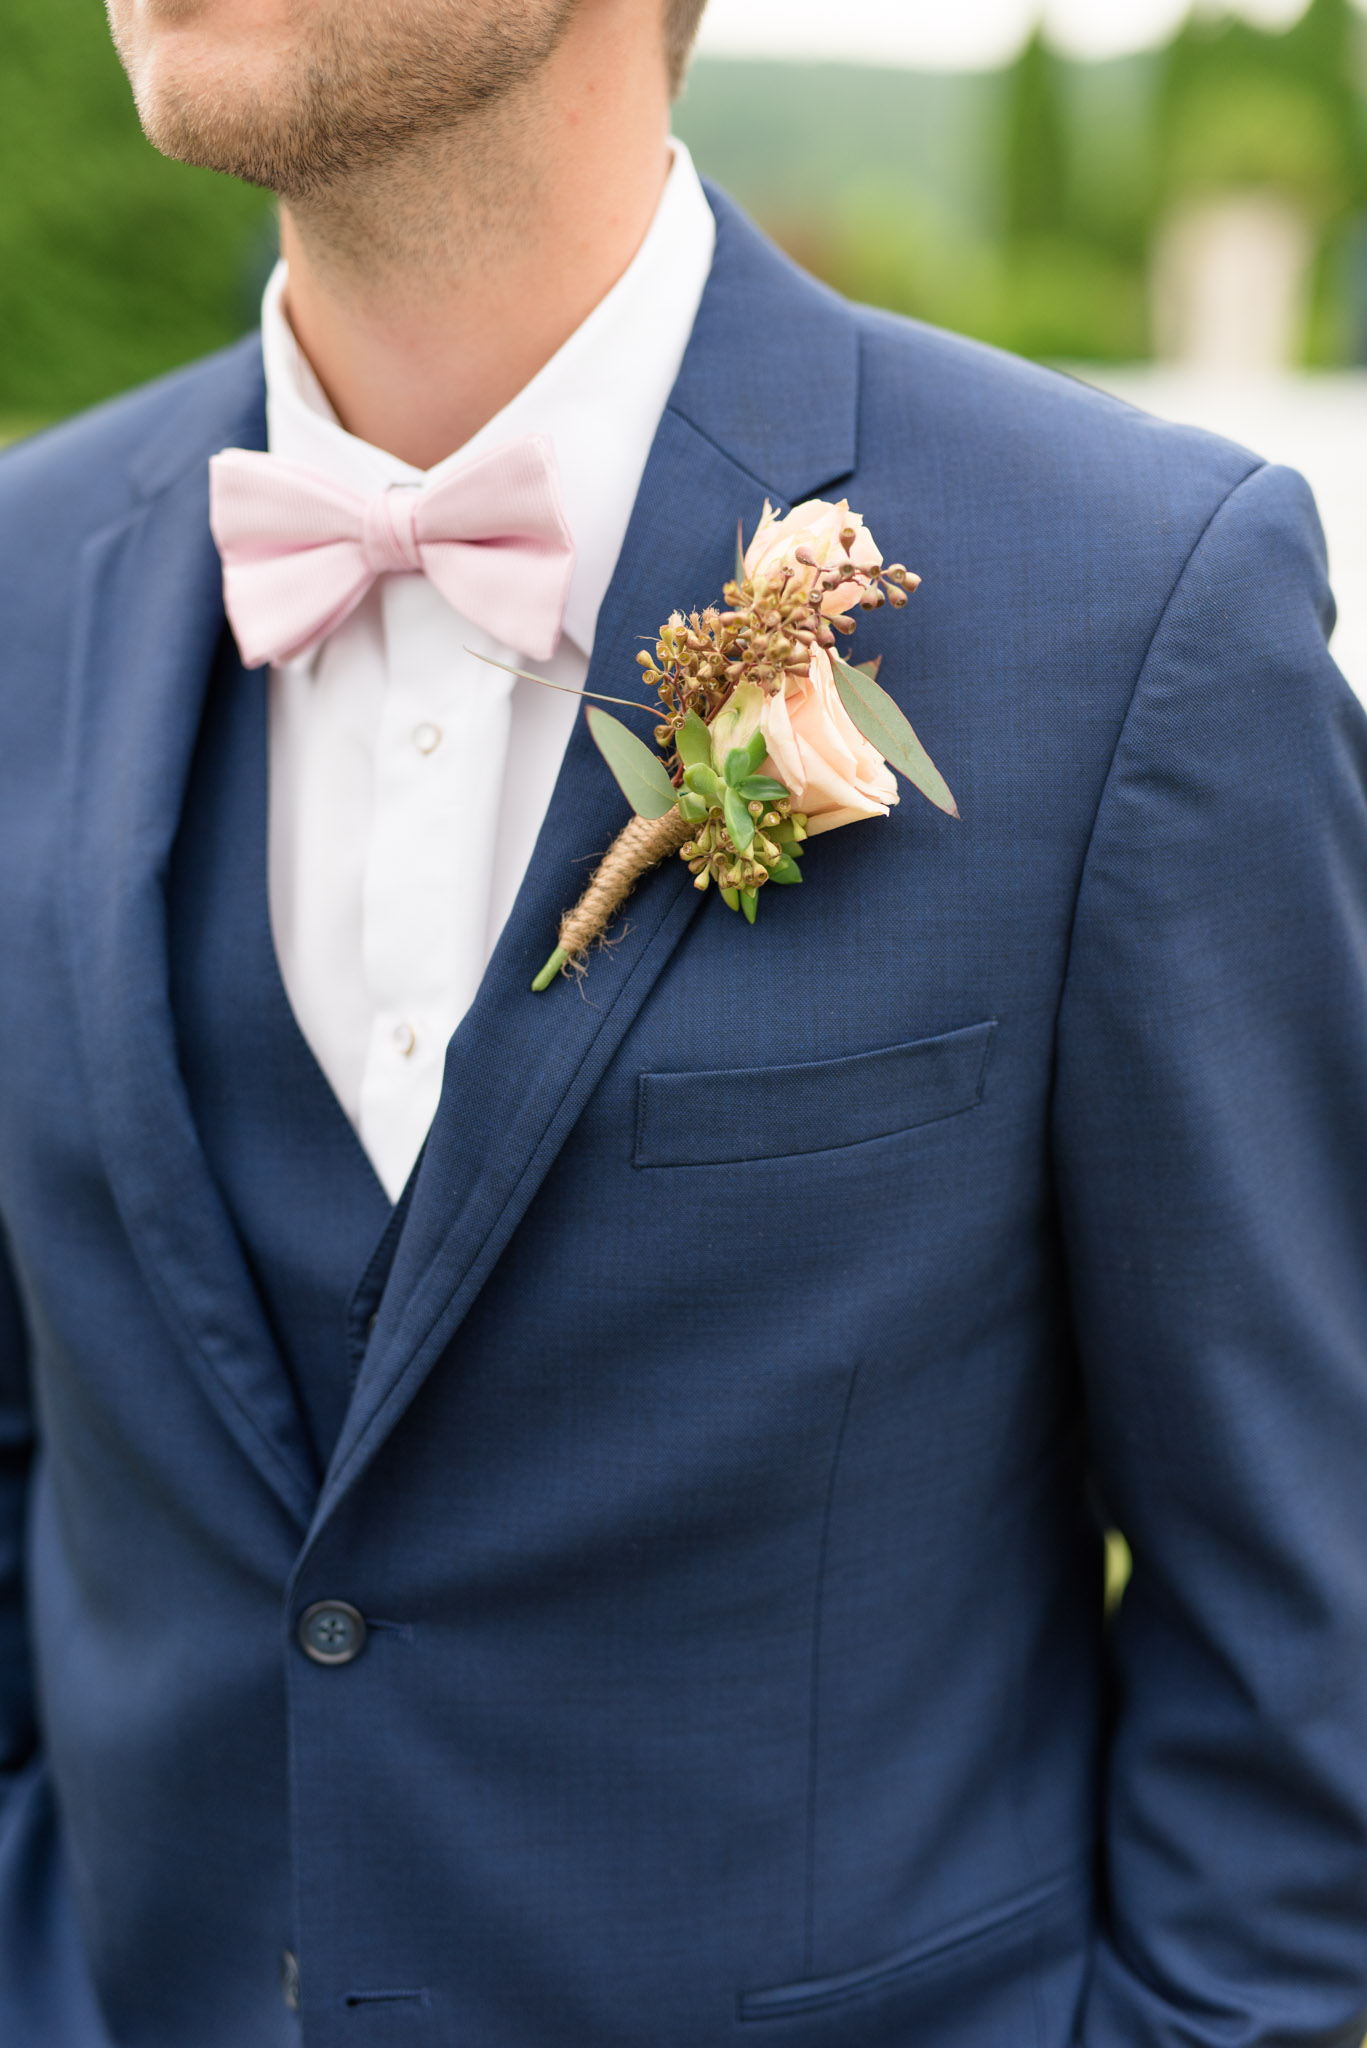 Groom's boutonniere pinned on jacket.